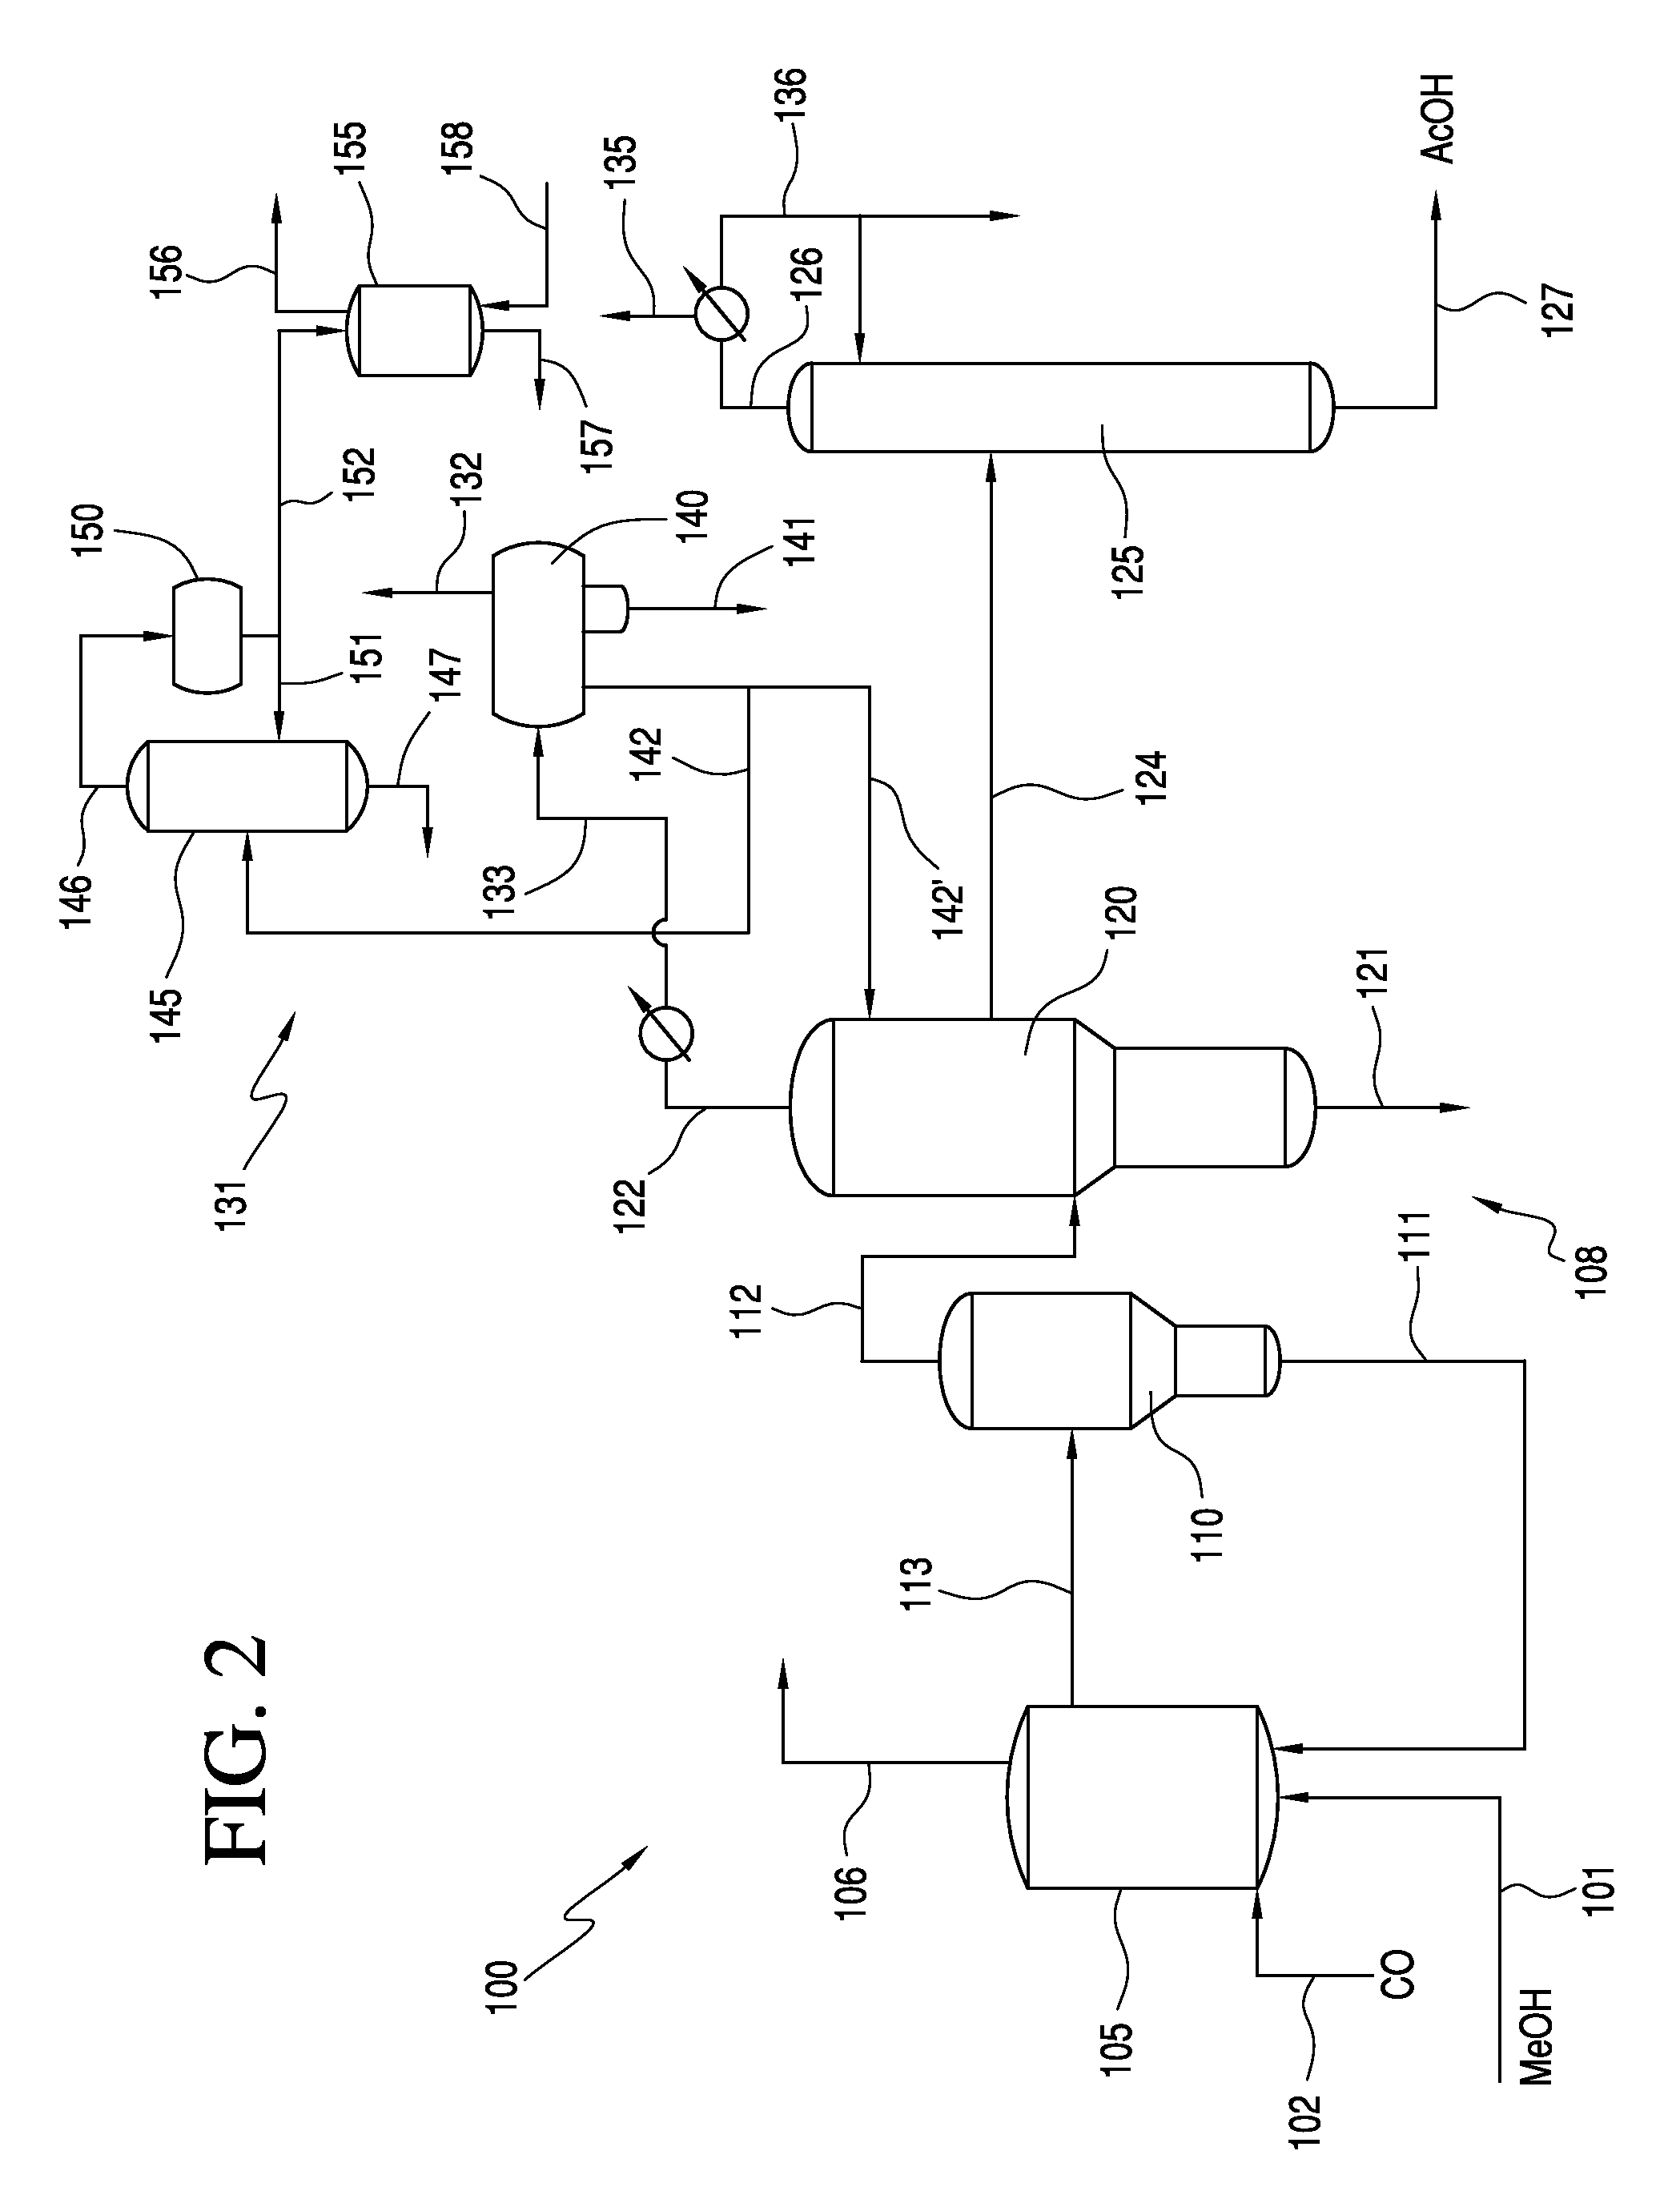 Processes for producing an acetic acid product having low butyl acetate content